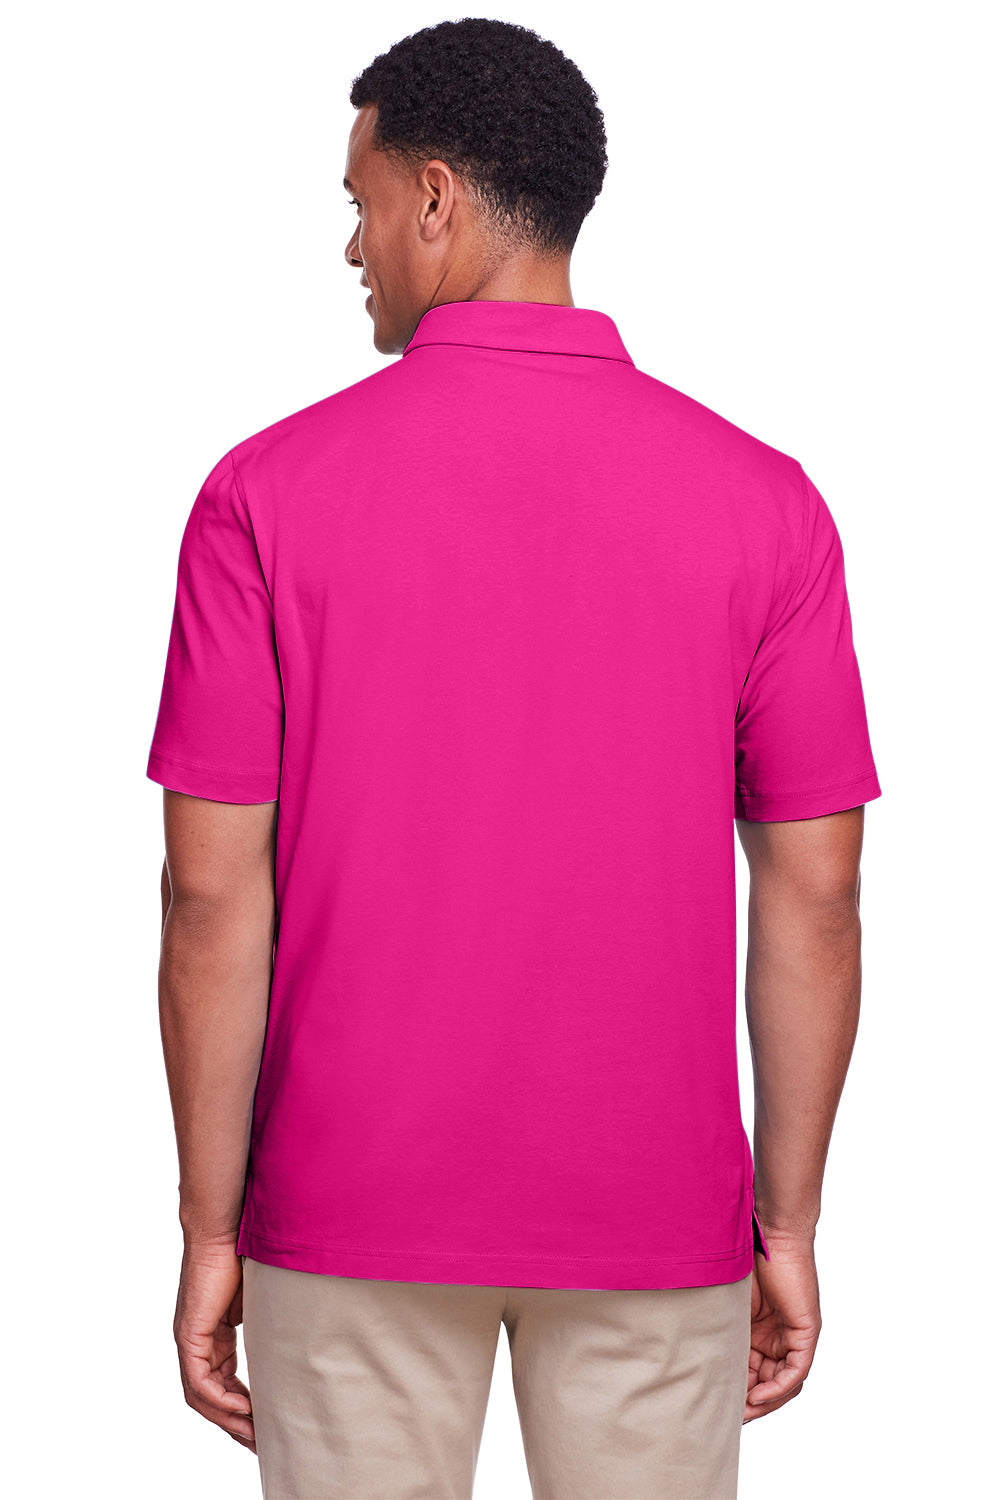 UltraClub UC105 Mens Lakeshore Performance Moisture Wicking Short Sleeve Polo Shirt Heliconia Pink Back